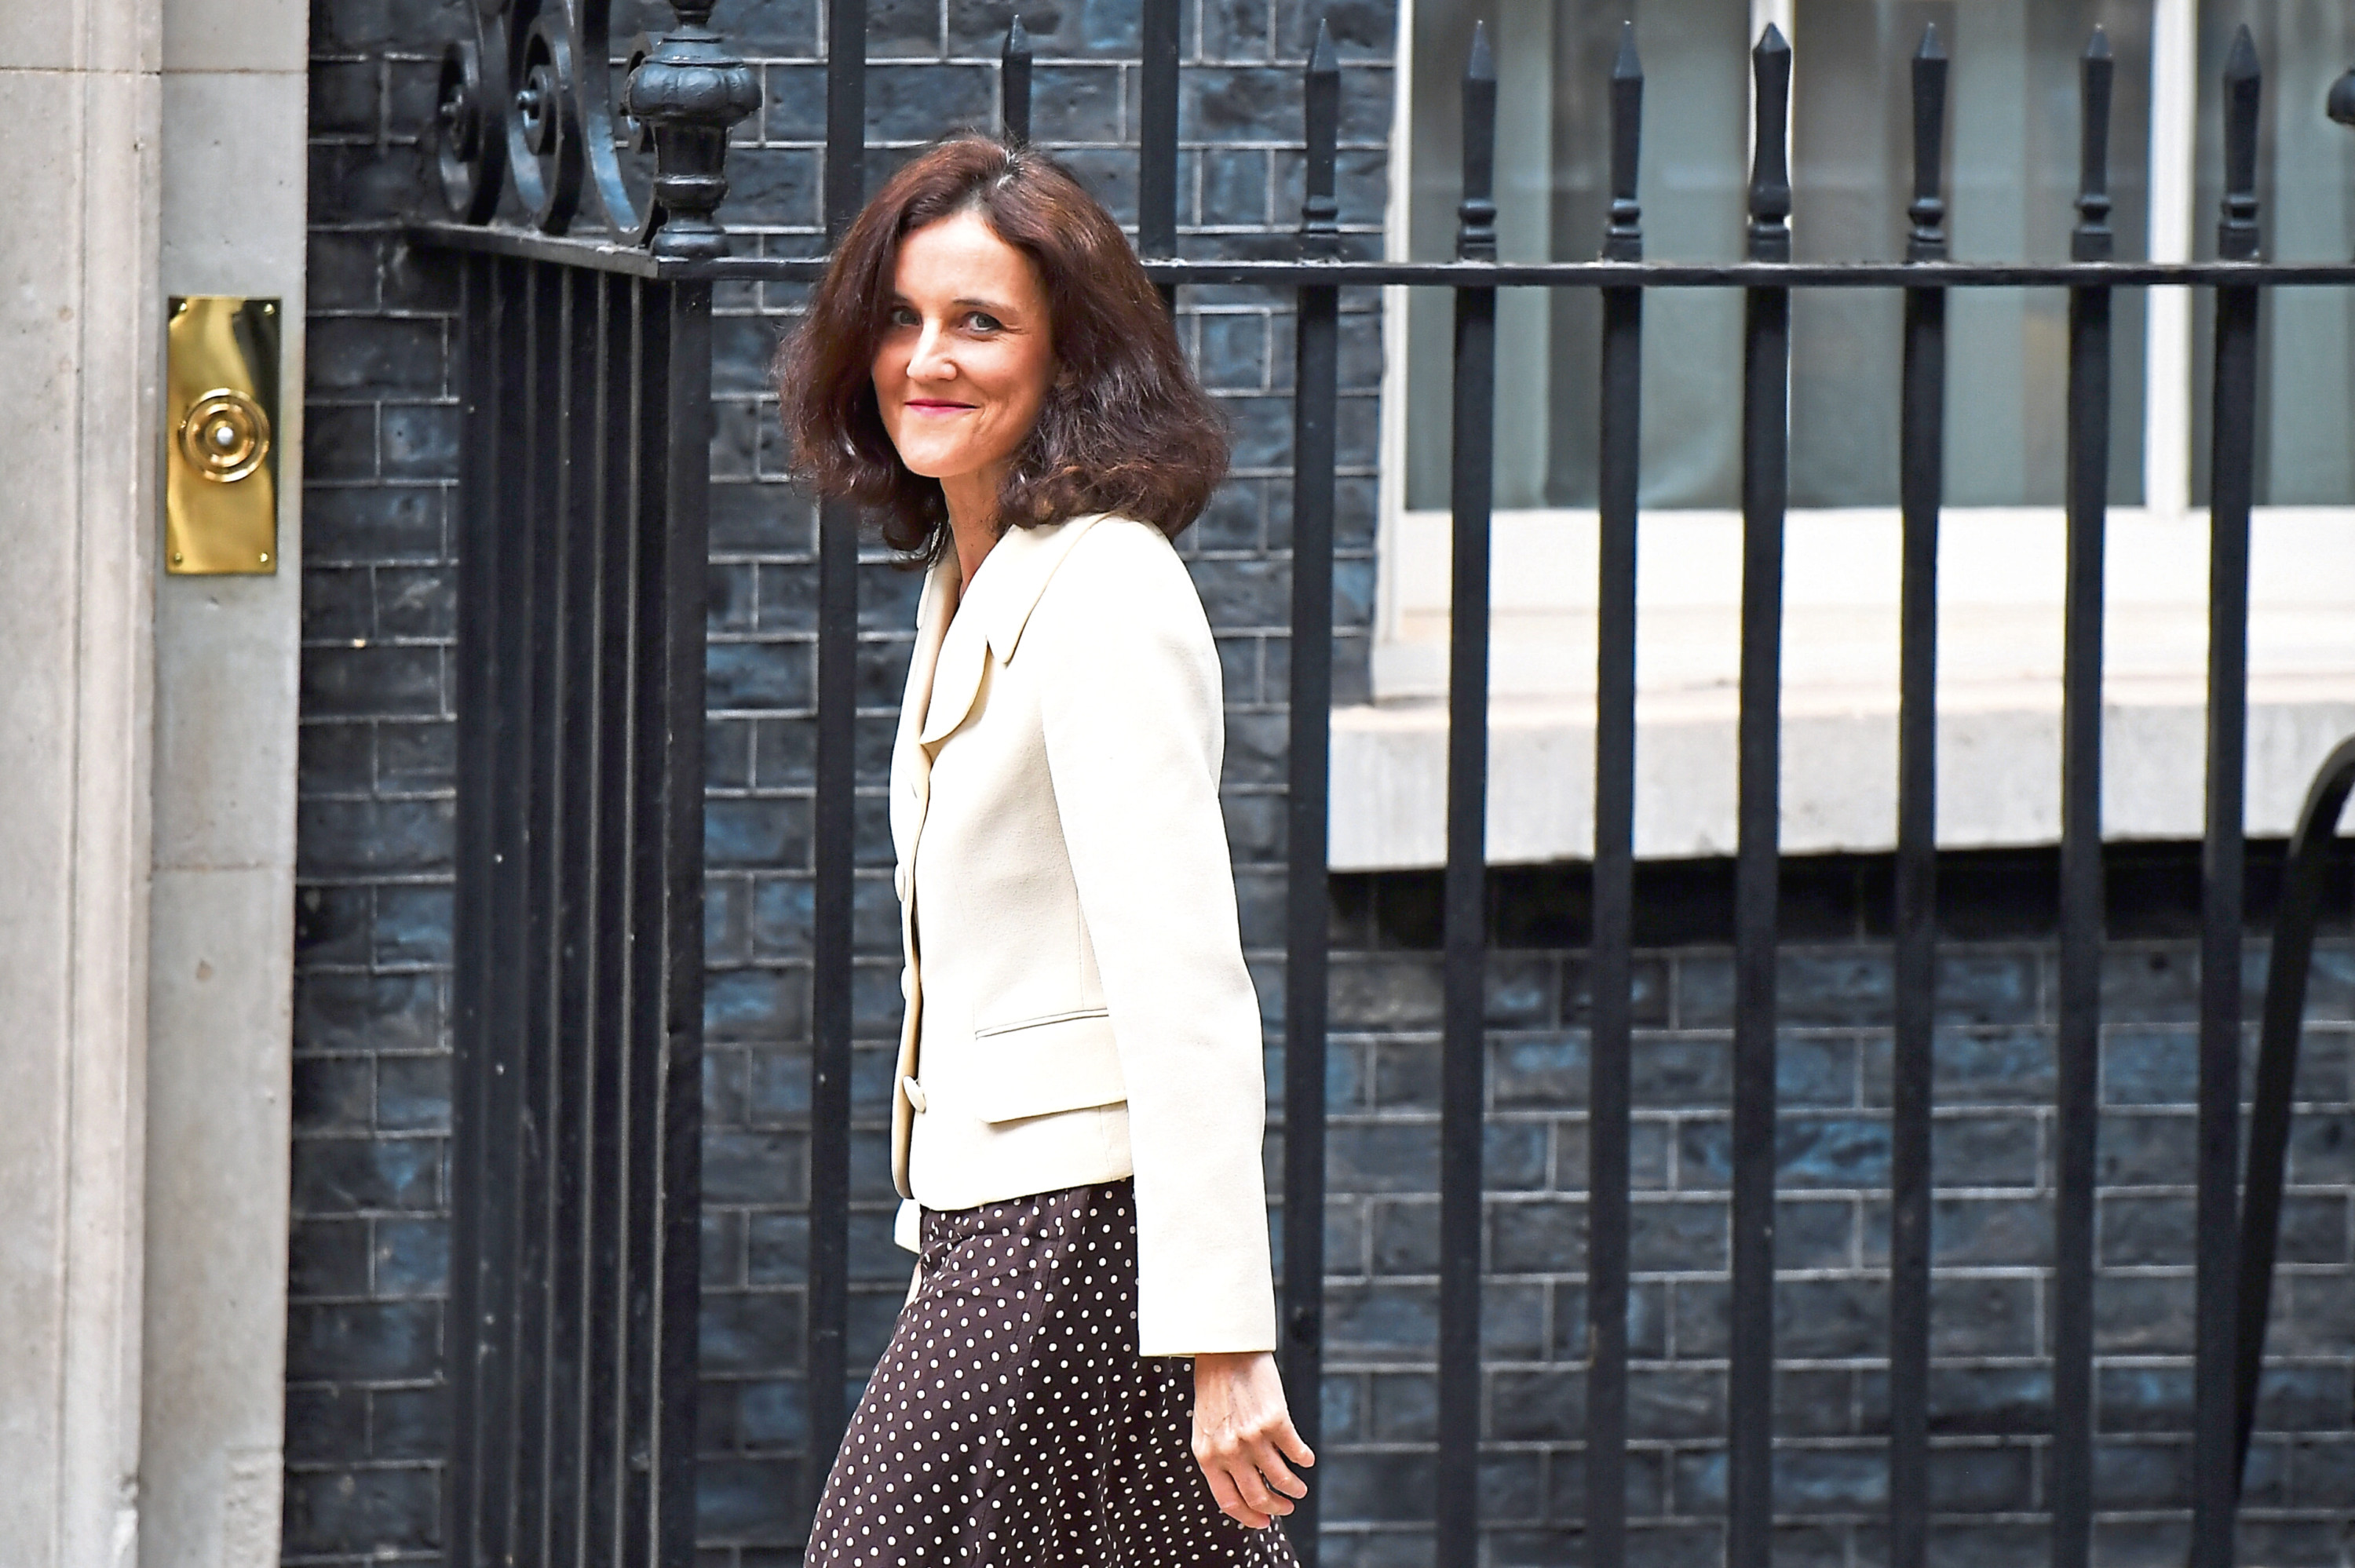 Defra Secretary of State Theresa Villiers outside 10 Downing Street.